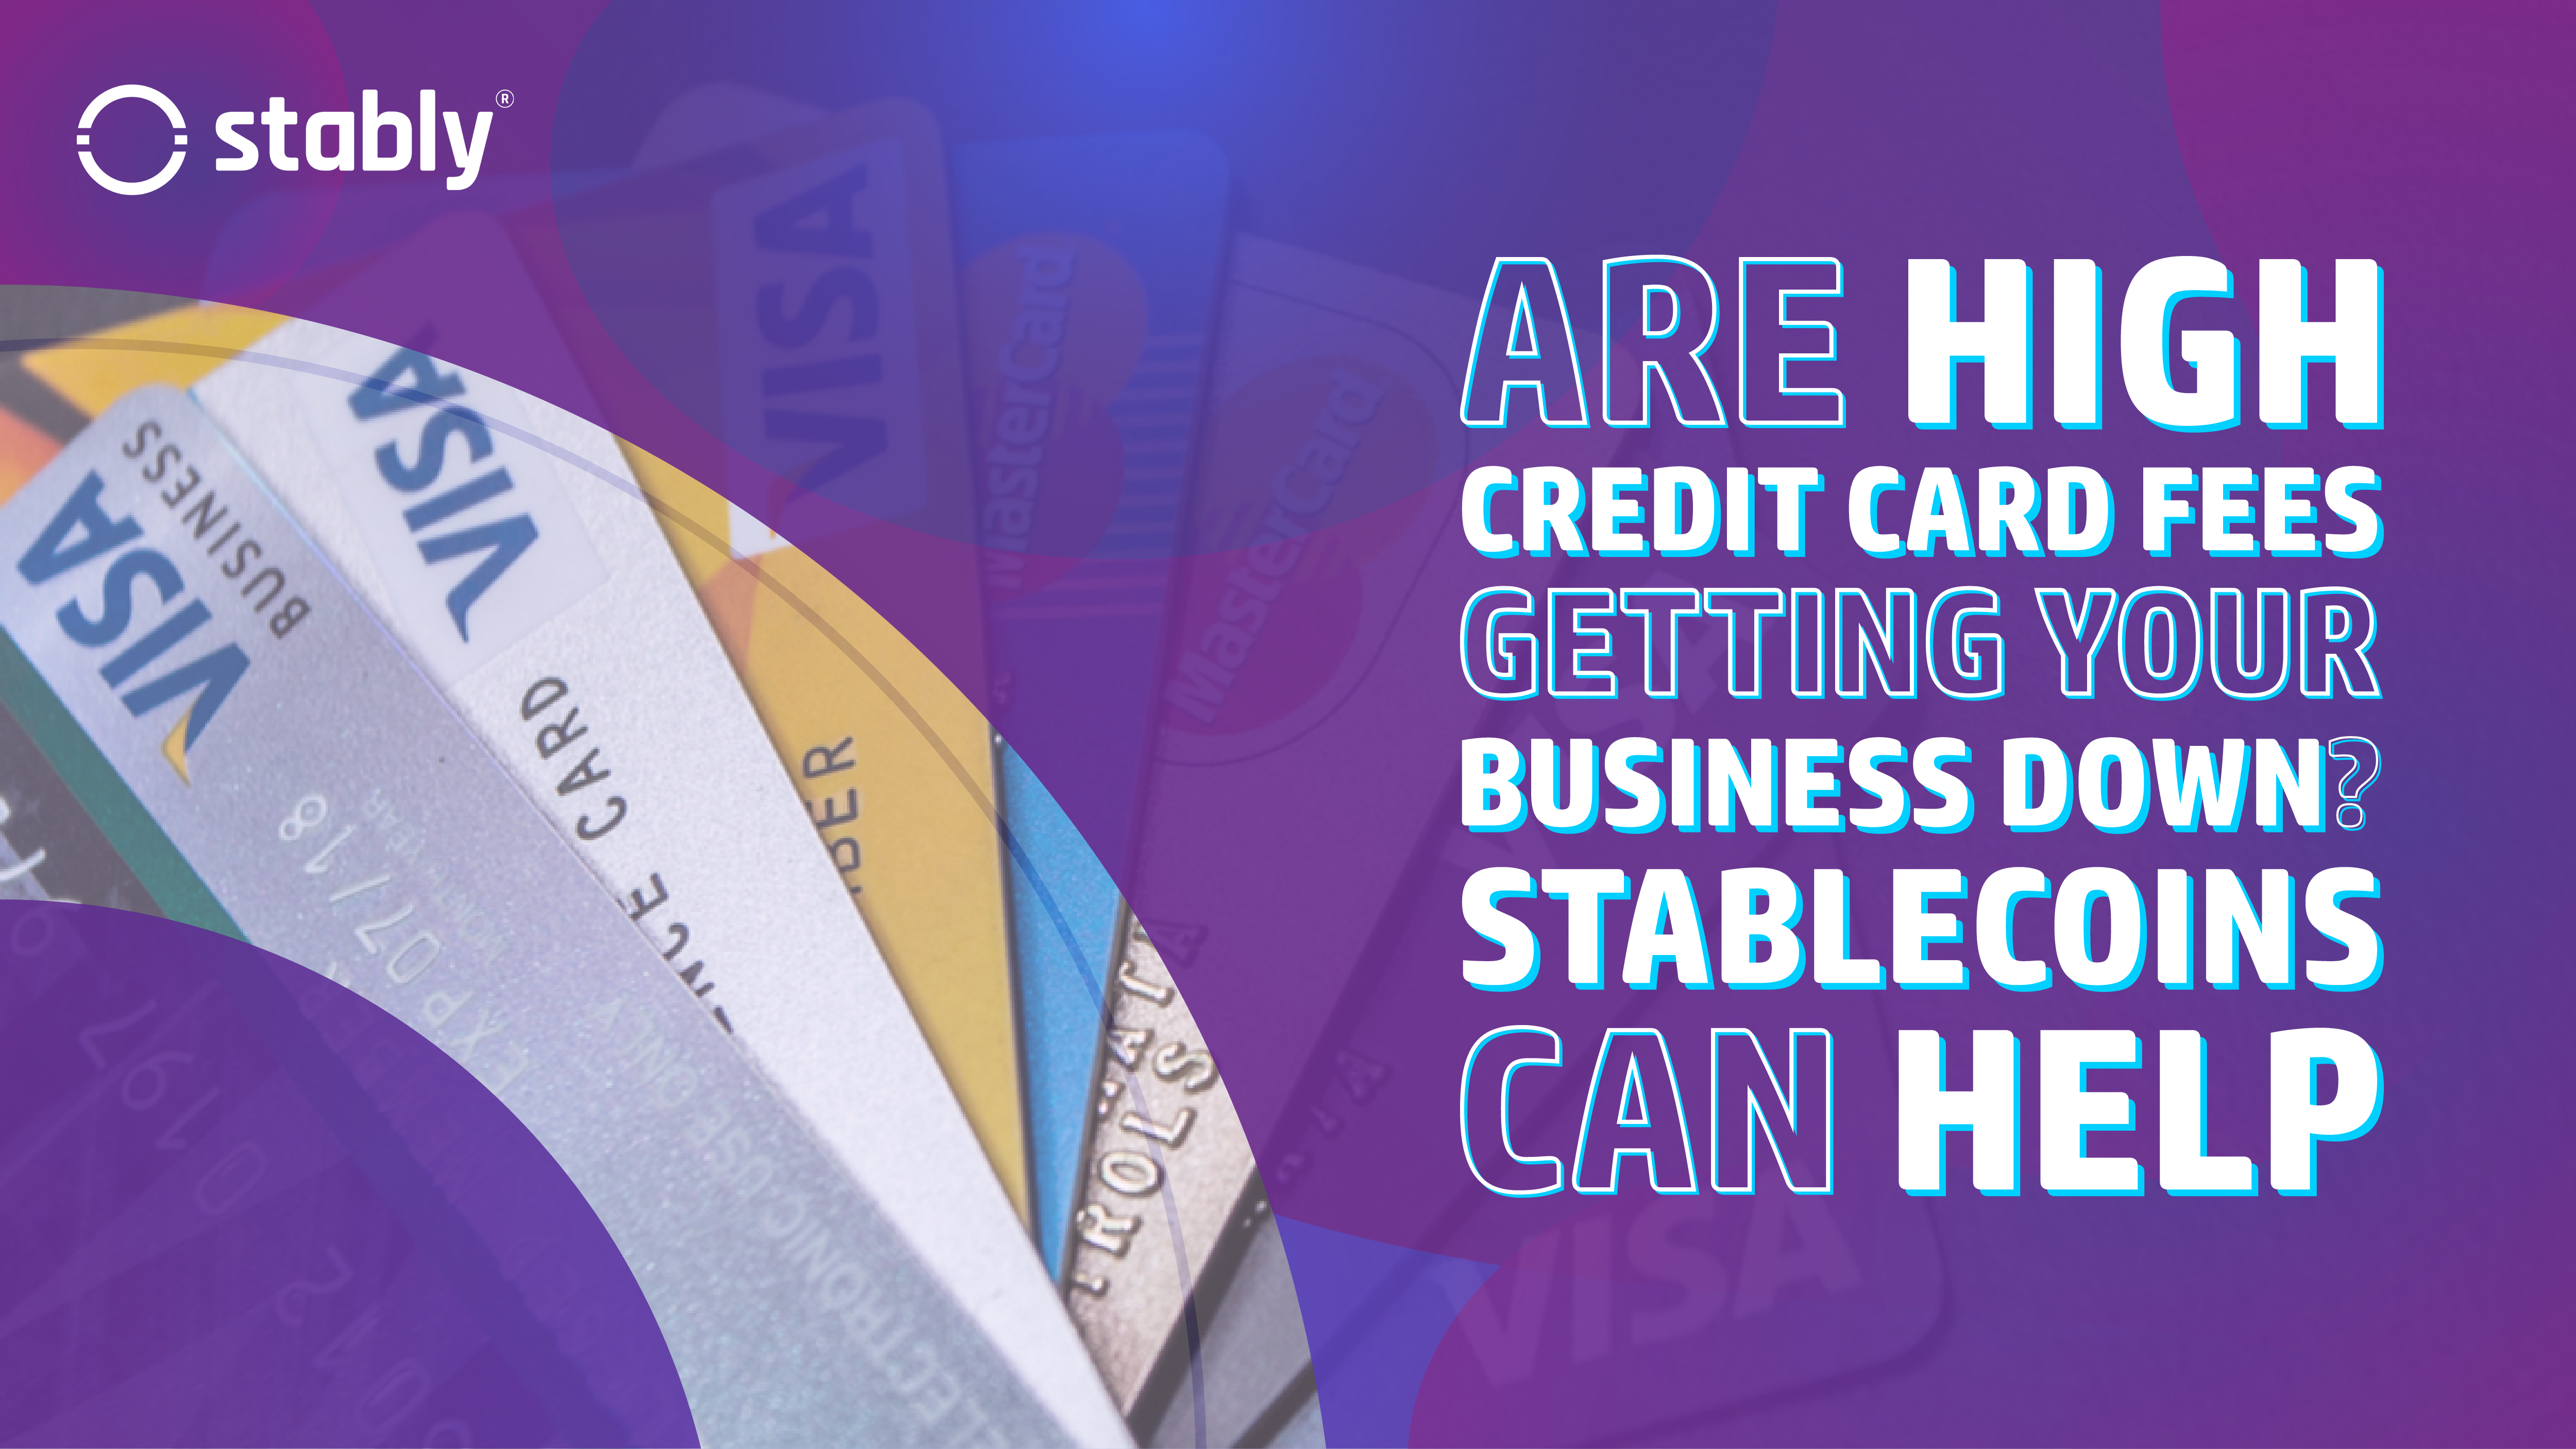 Credit Card, Stablecoins, Business, Blockchain, Fee, Solutions